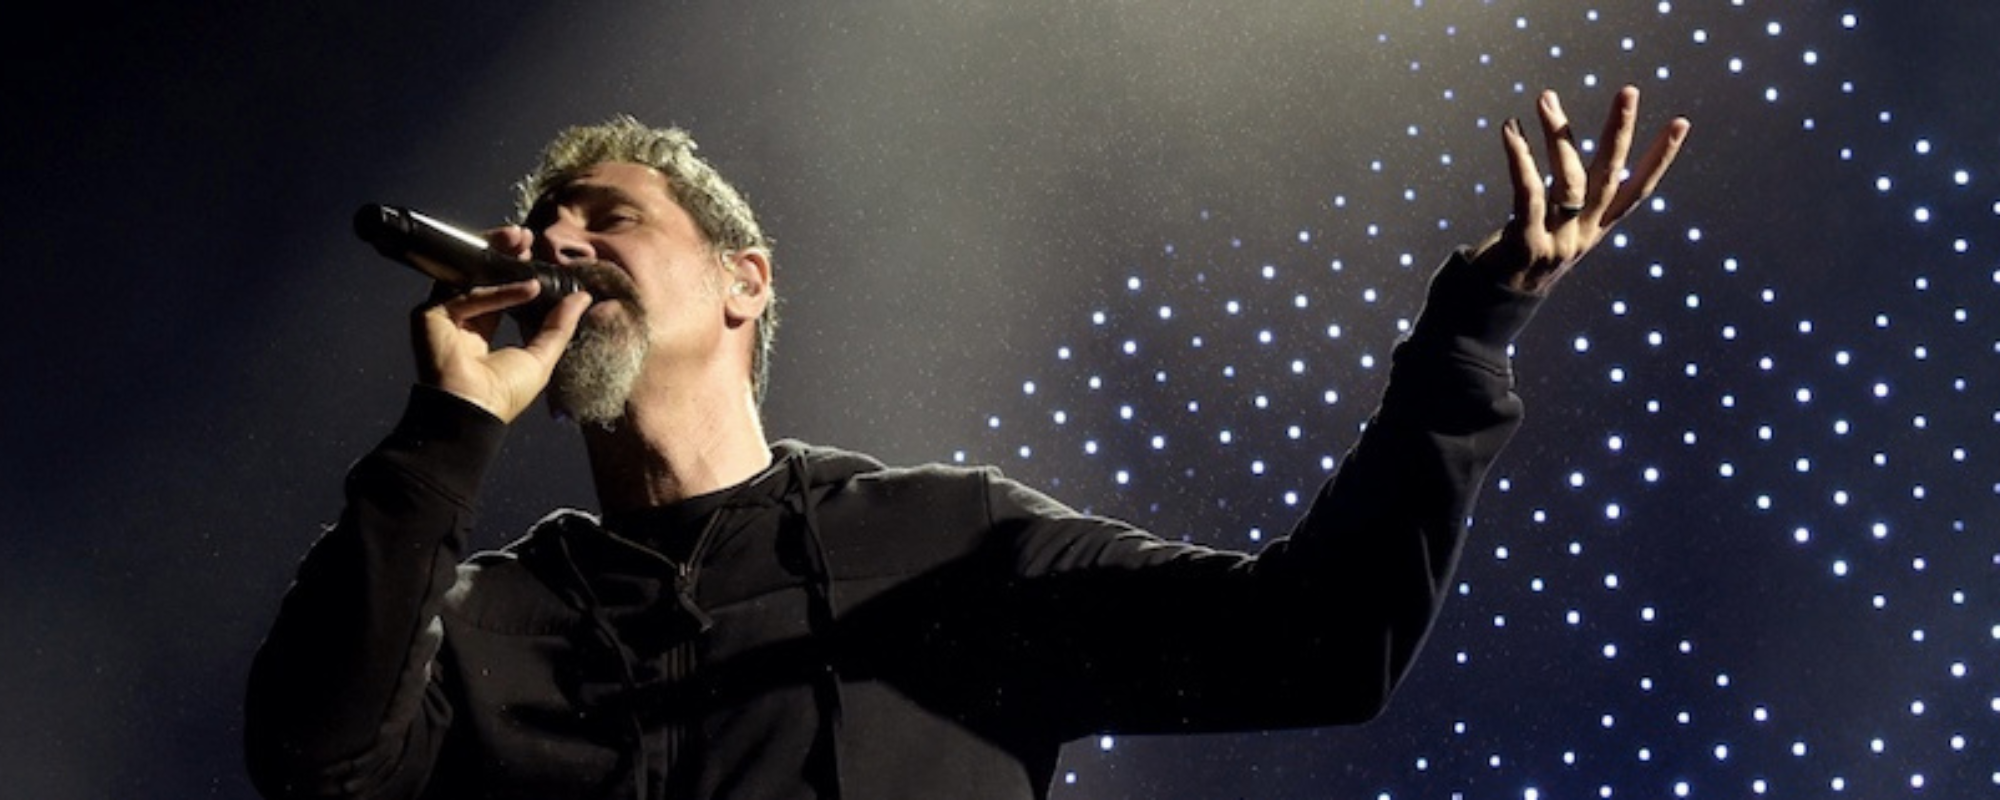 System of a Down Frontman Serj Tankian Announces New Memoir, ‘Down With the System’